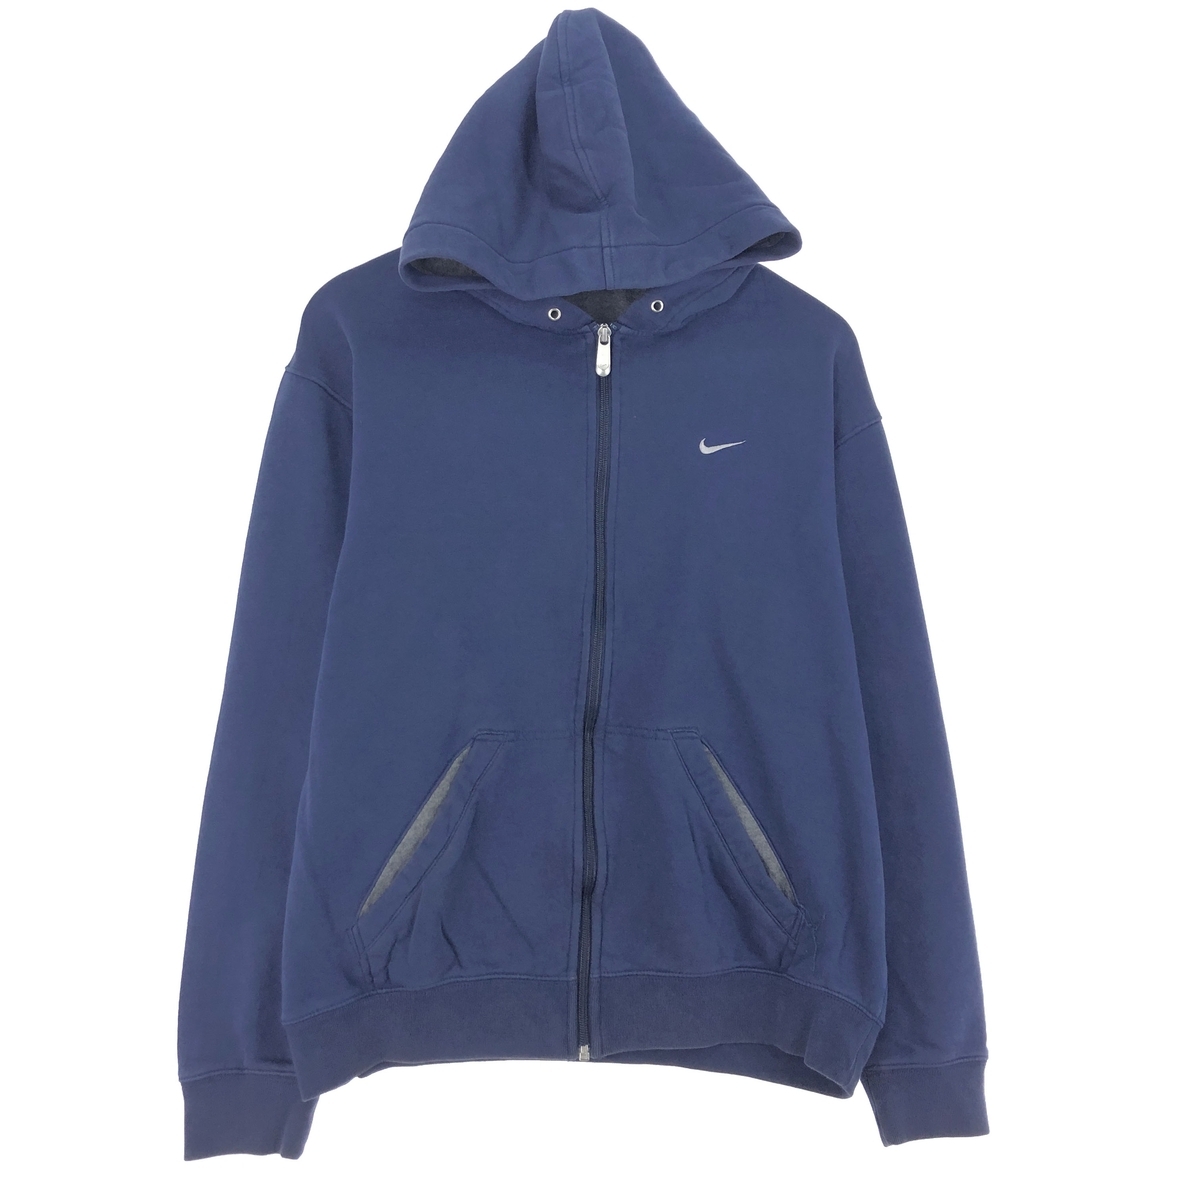  old clothes Nike NIKE sweat full Zip Parker men's M /eaa443251